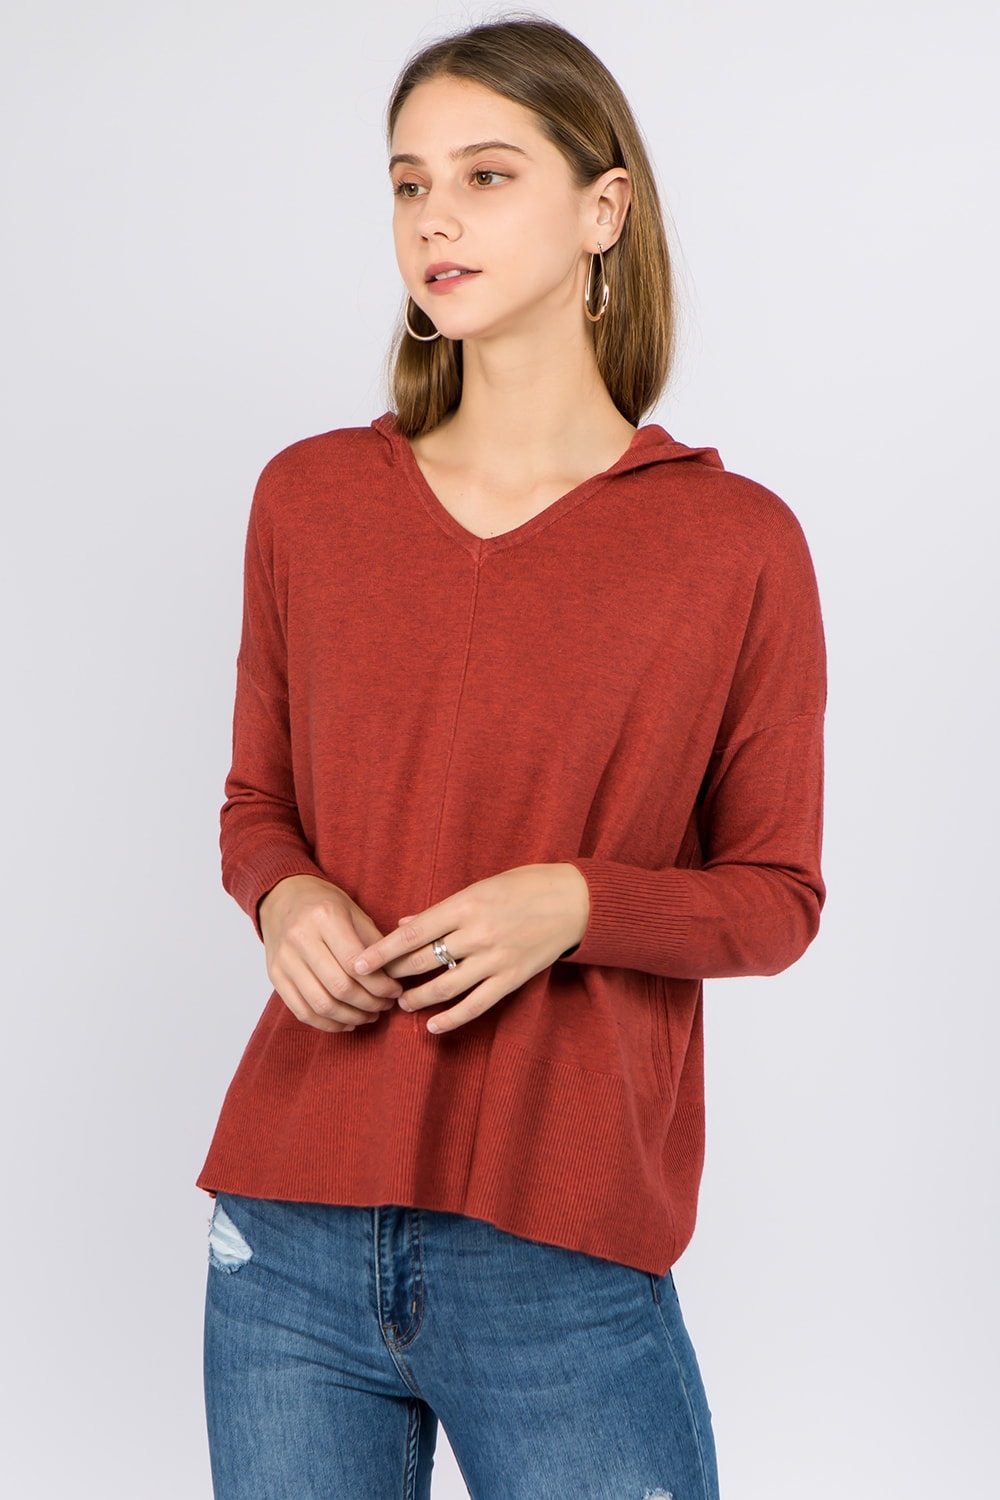 Dreamers Hoodie - Heather Red Rust T3478 - Simply Beautiful Jewelry ...